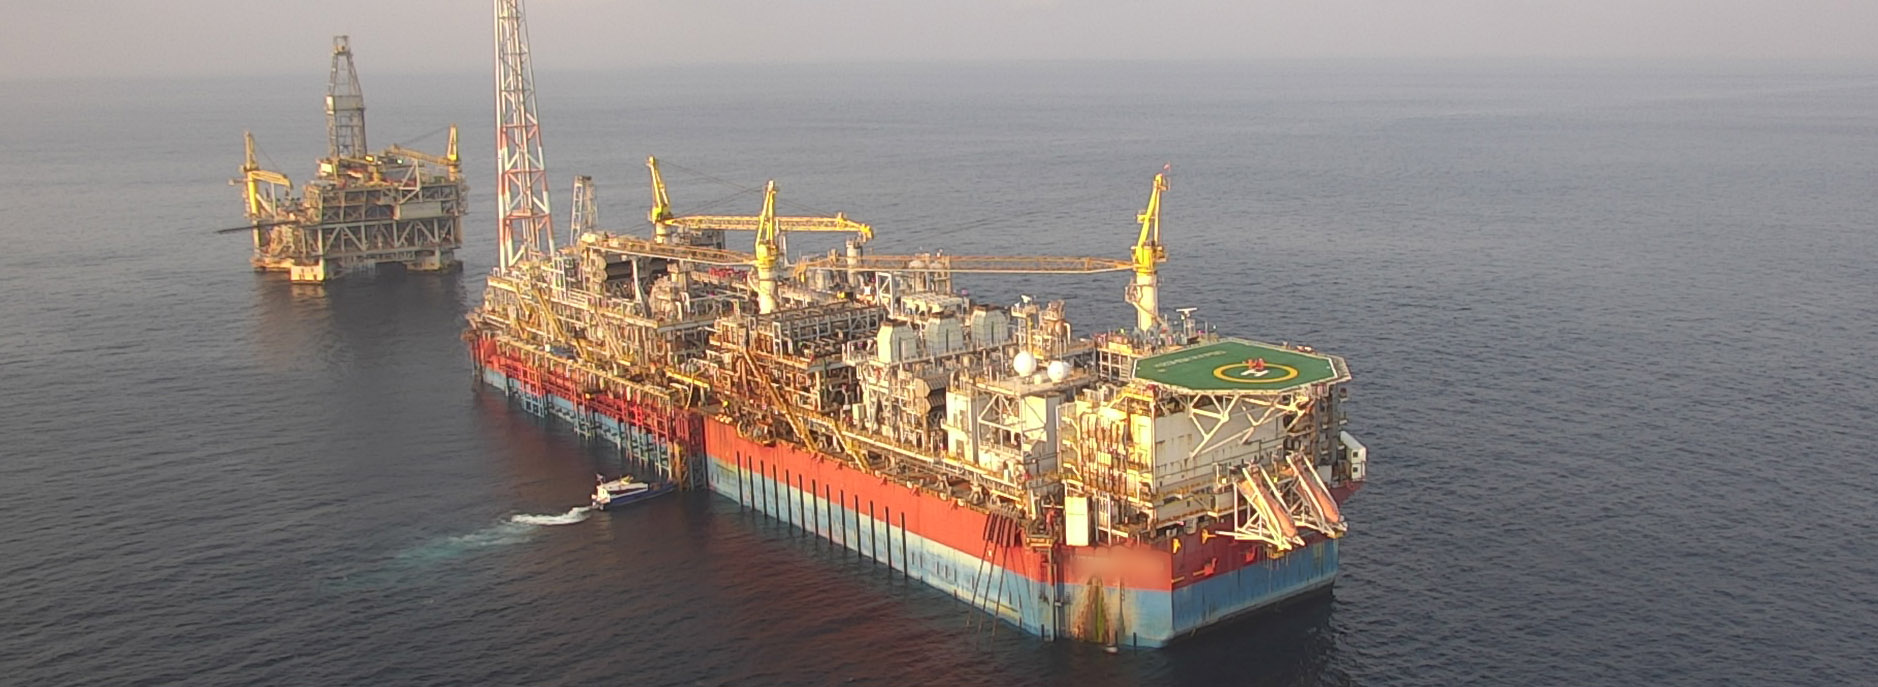 Offshore Inspection campaign Angola - Skeye